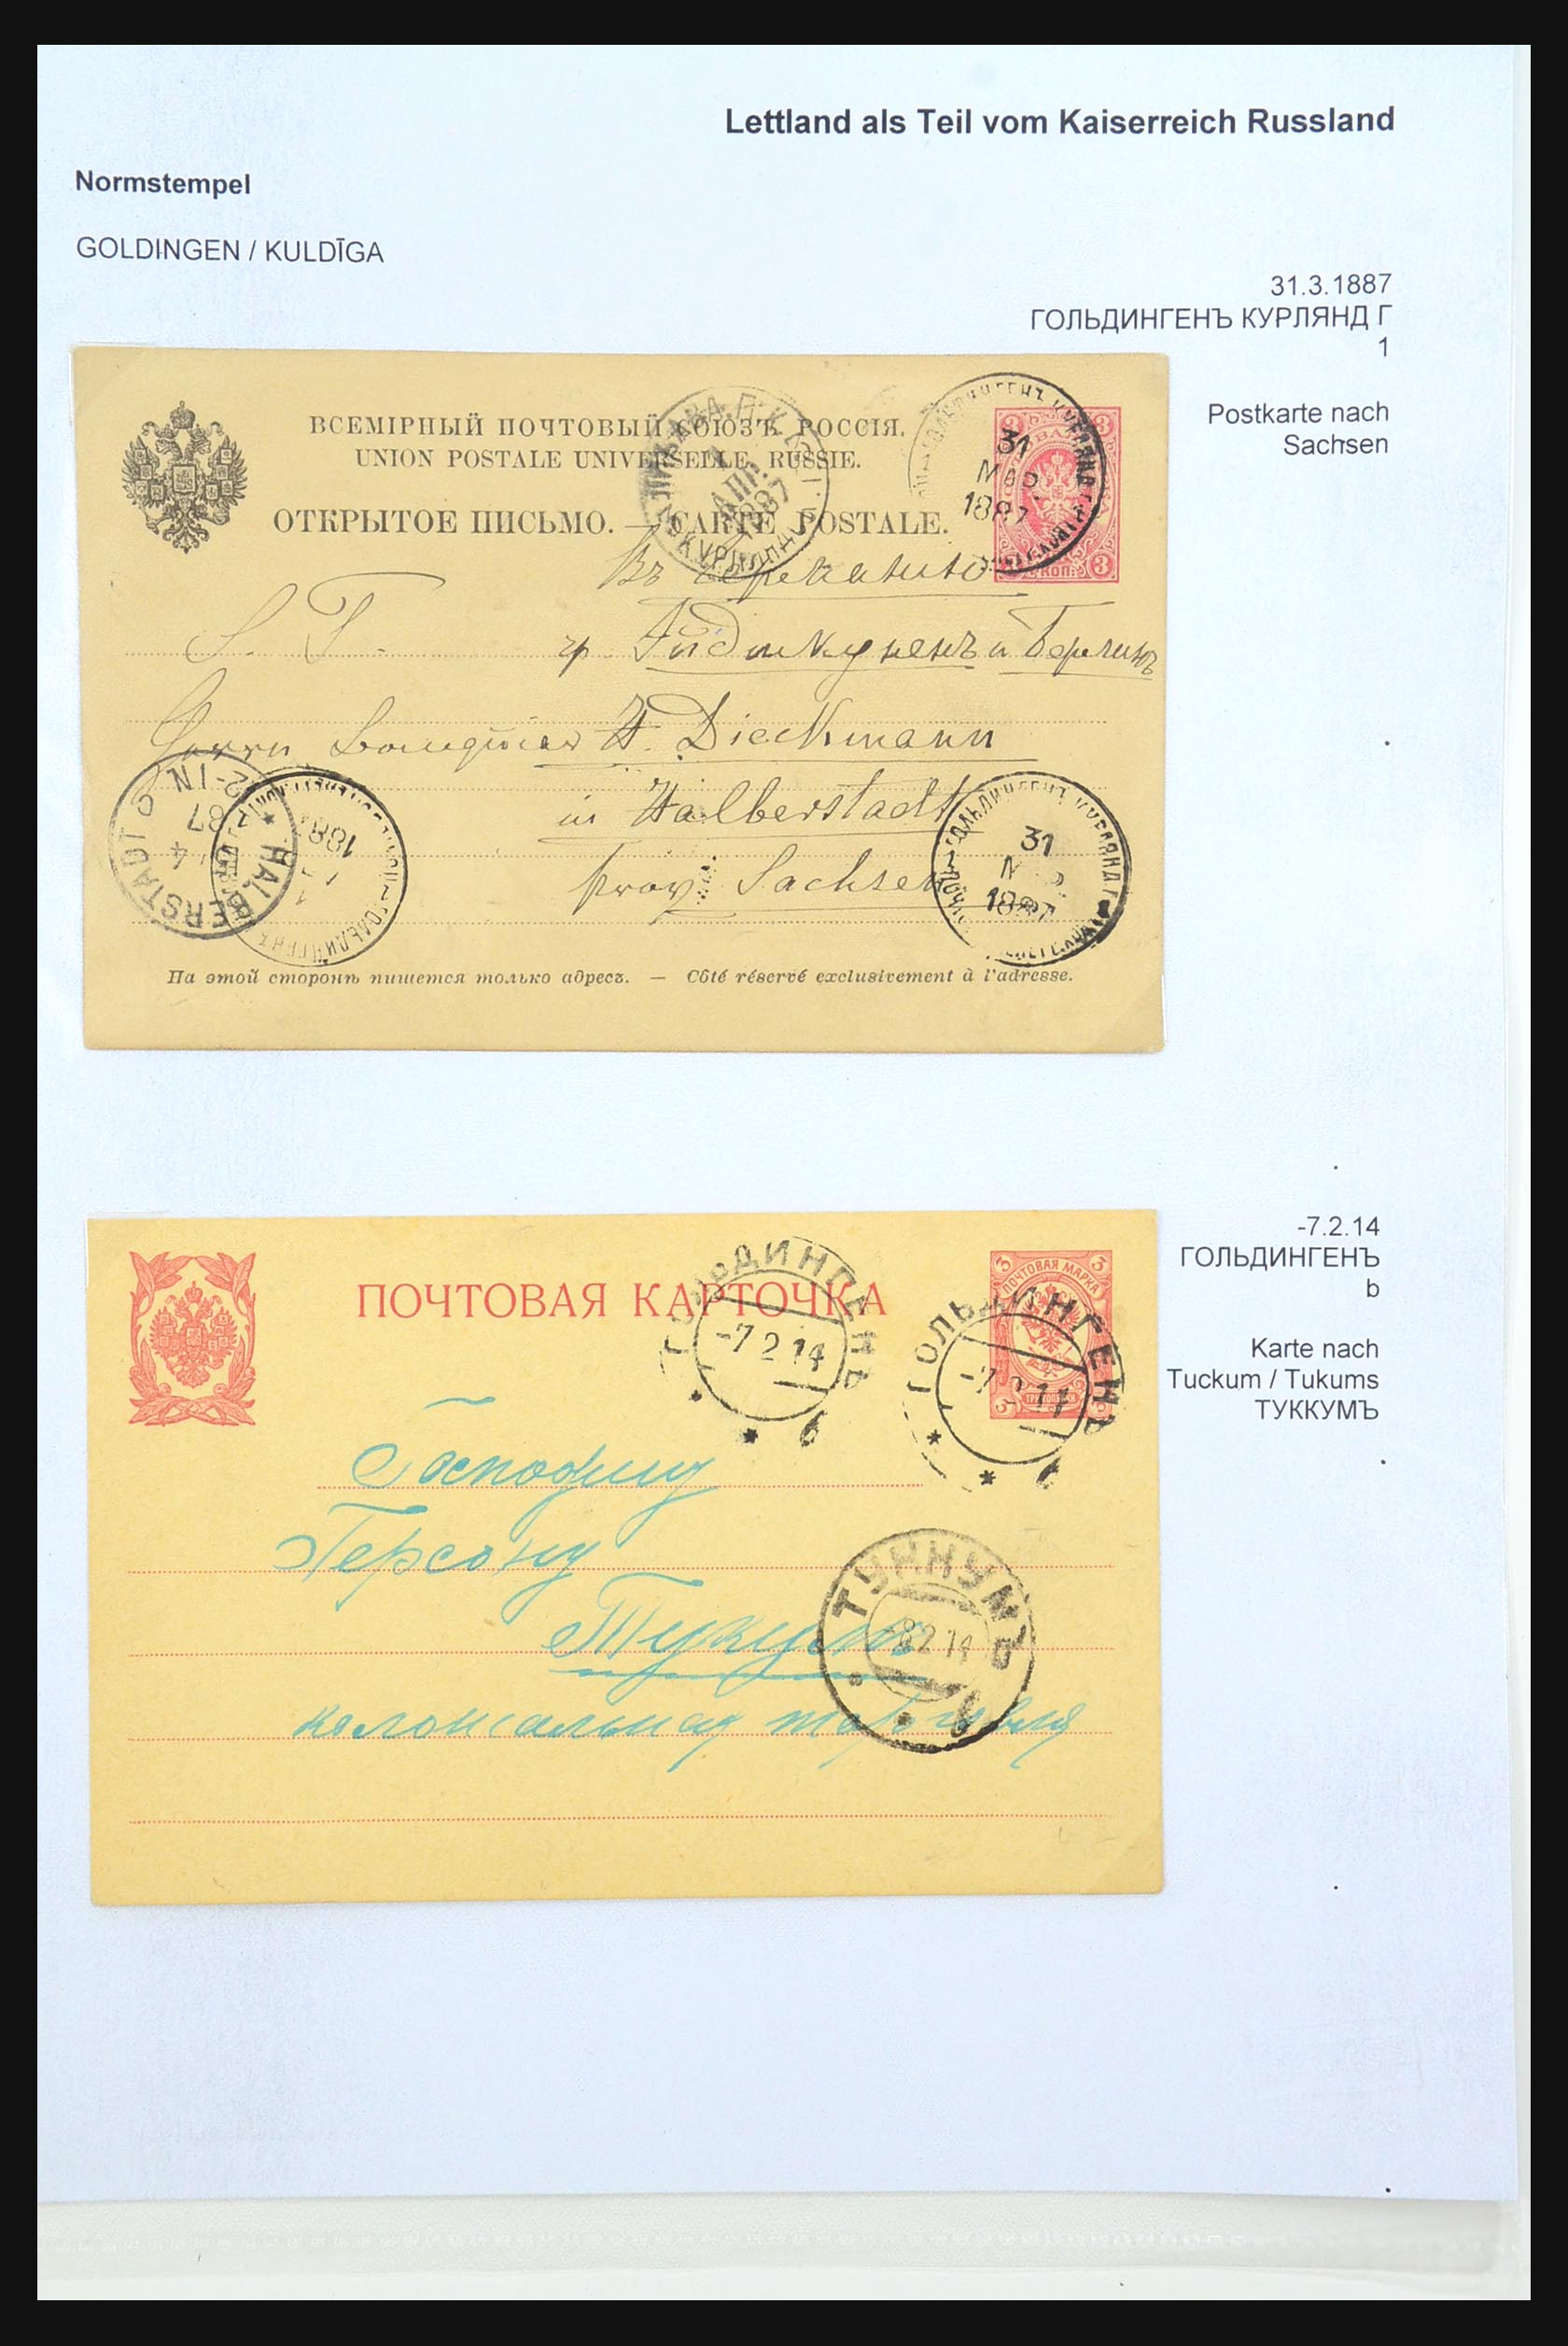 31305 042 - 31305 Latvia as part of Russia 1817-1918.